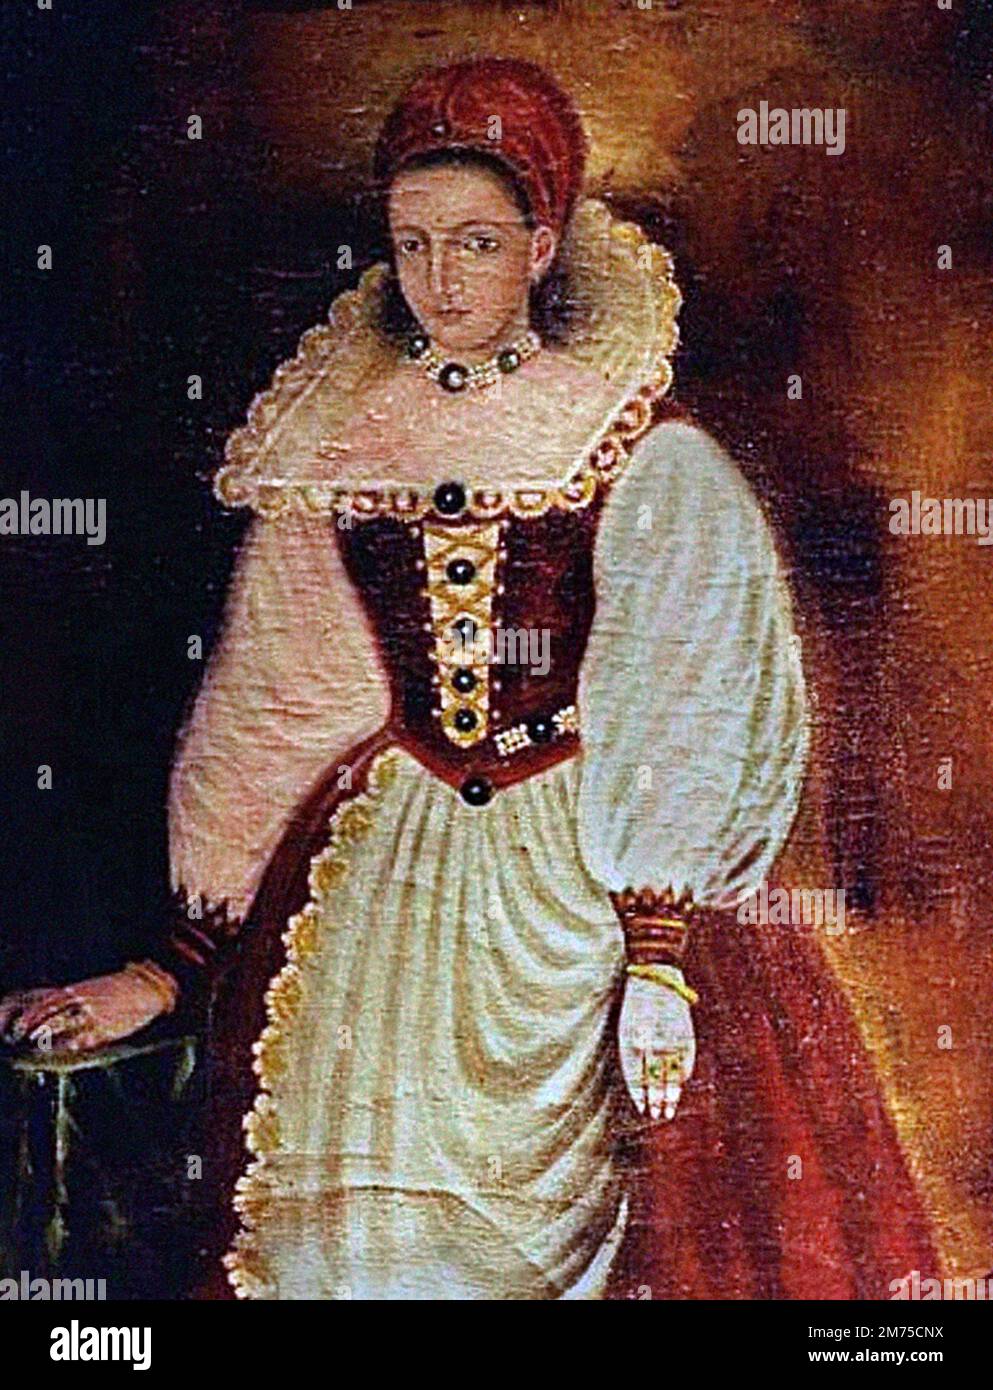 Elizabeth Báthory. Portrait of Countess Elizabeth Báthory de Ecsed (1560-1614), copy of a lost original painted in 1585. Bathory was a Hungarian noblewoman and alleged serial killer from the family of Báthory, who owned land in the Kingdom of Hungary (now Slovakia). She and four of her servants were accused of torturing and killing hundreds of girls and women between 1590 and 1610. Her servants were put on trial and convicted, whereas Báthory was confined until her death. Stock Photo